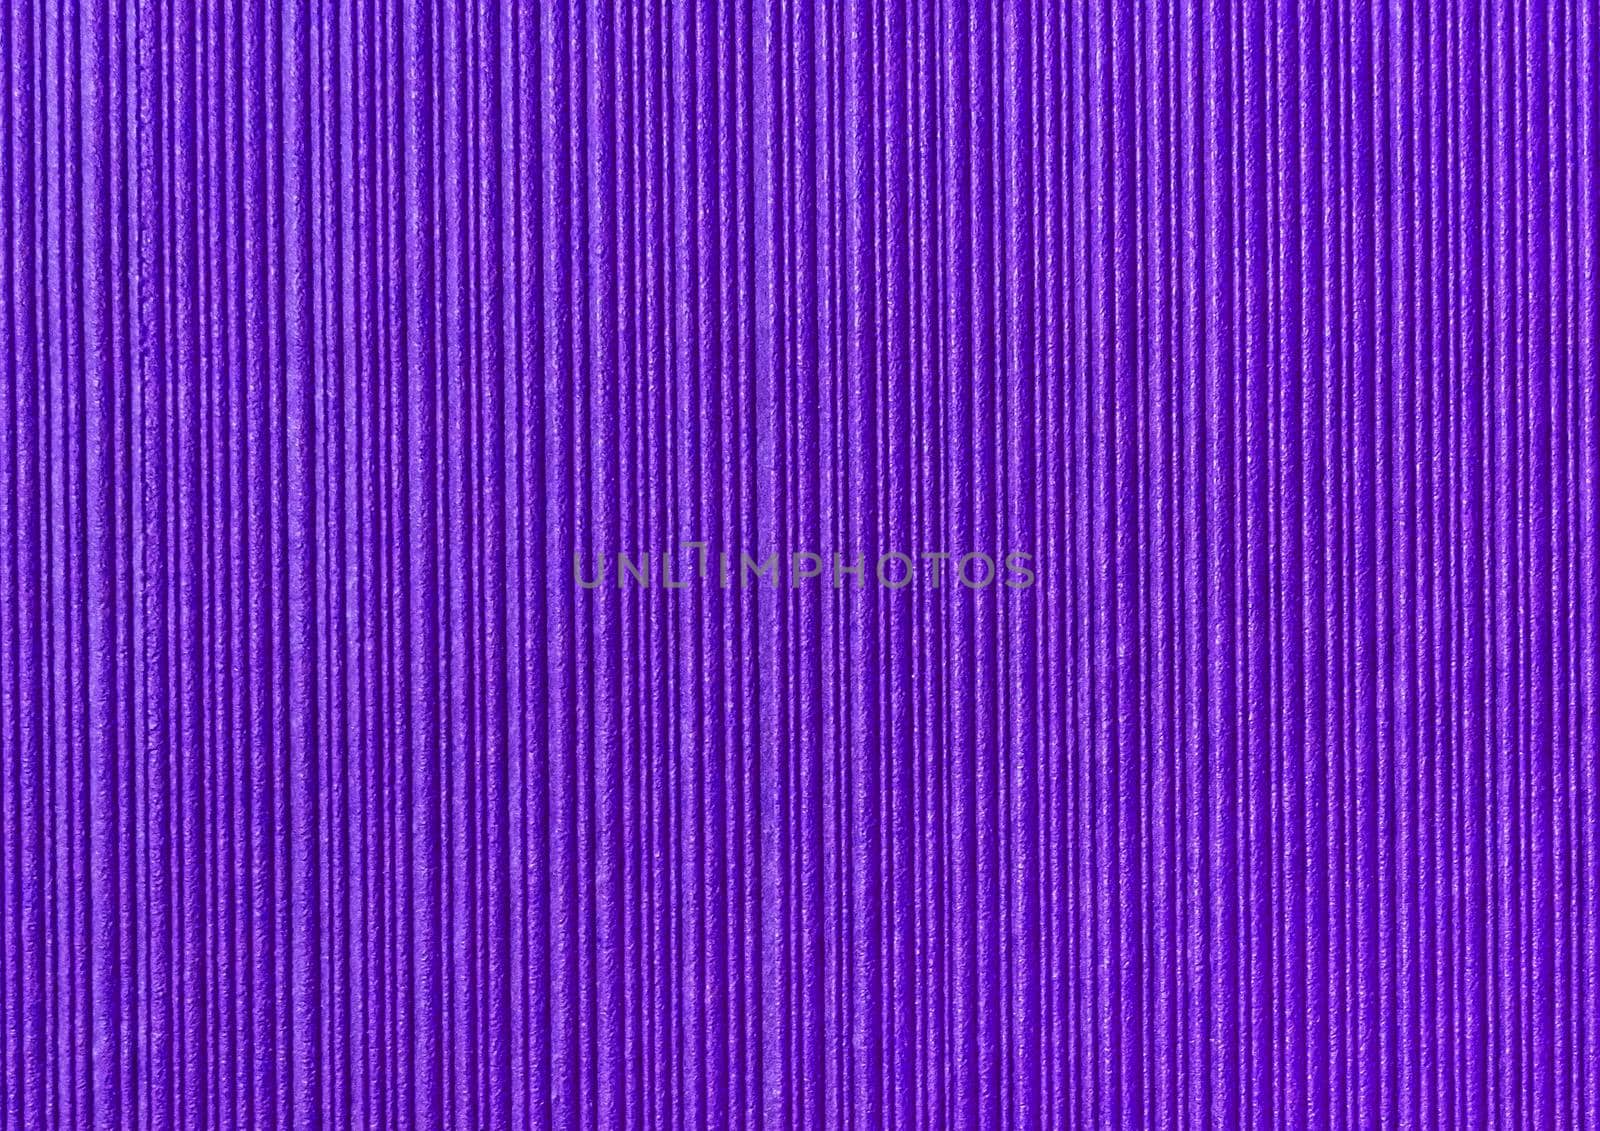 Purple abstract striped pattern wallpaper background, violet paper texture with vertical lines by AYDO8